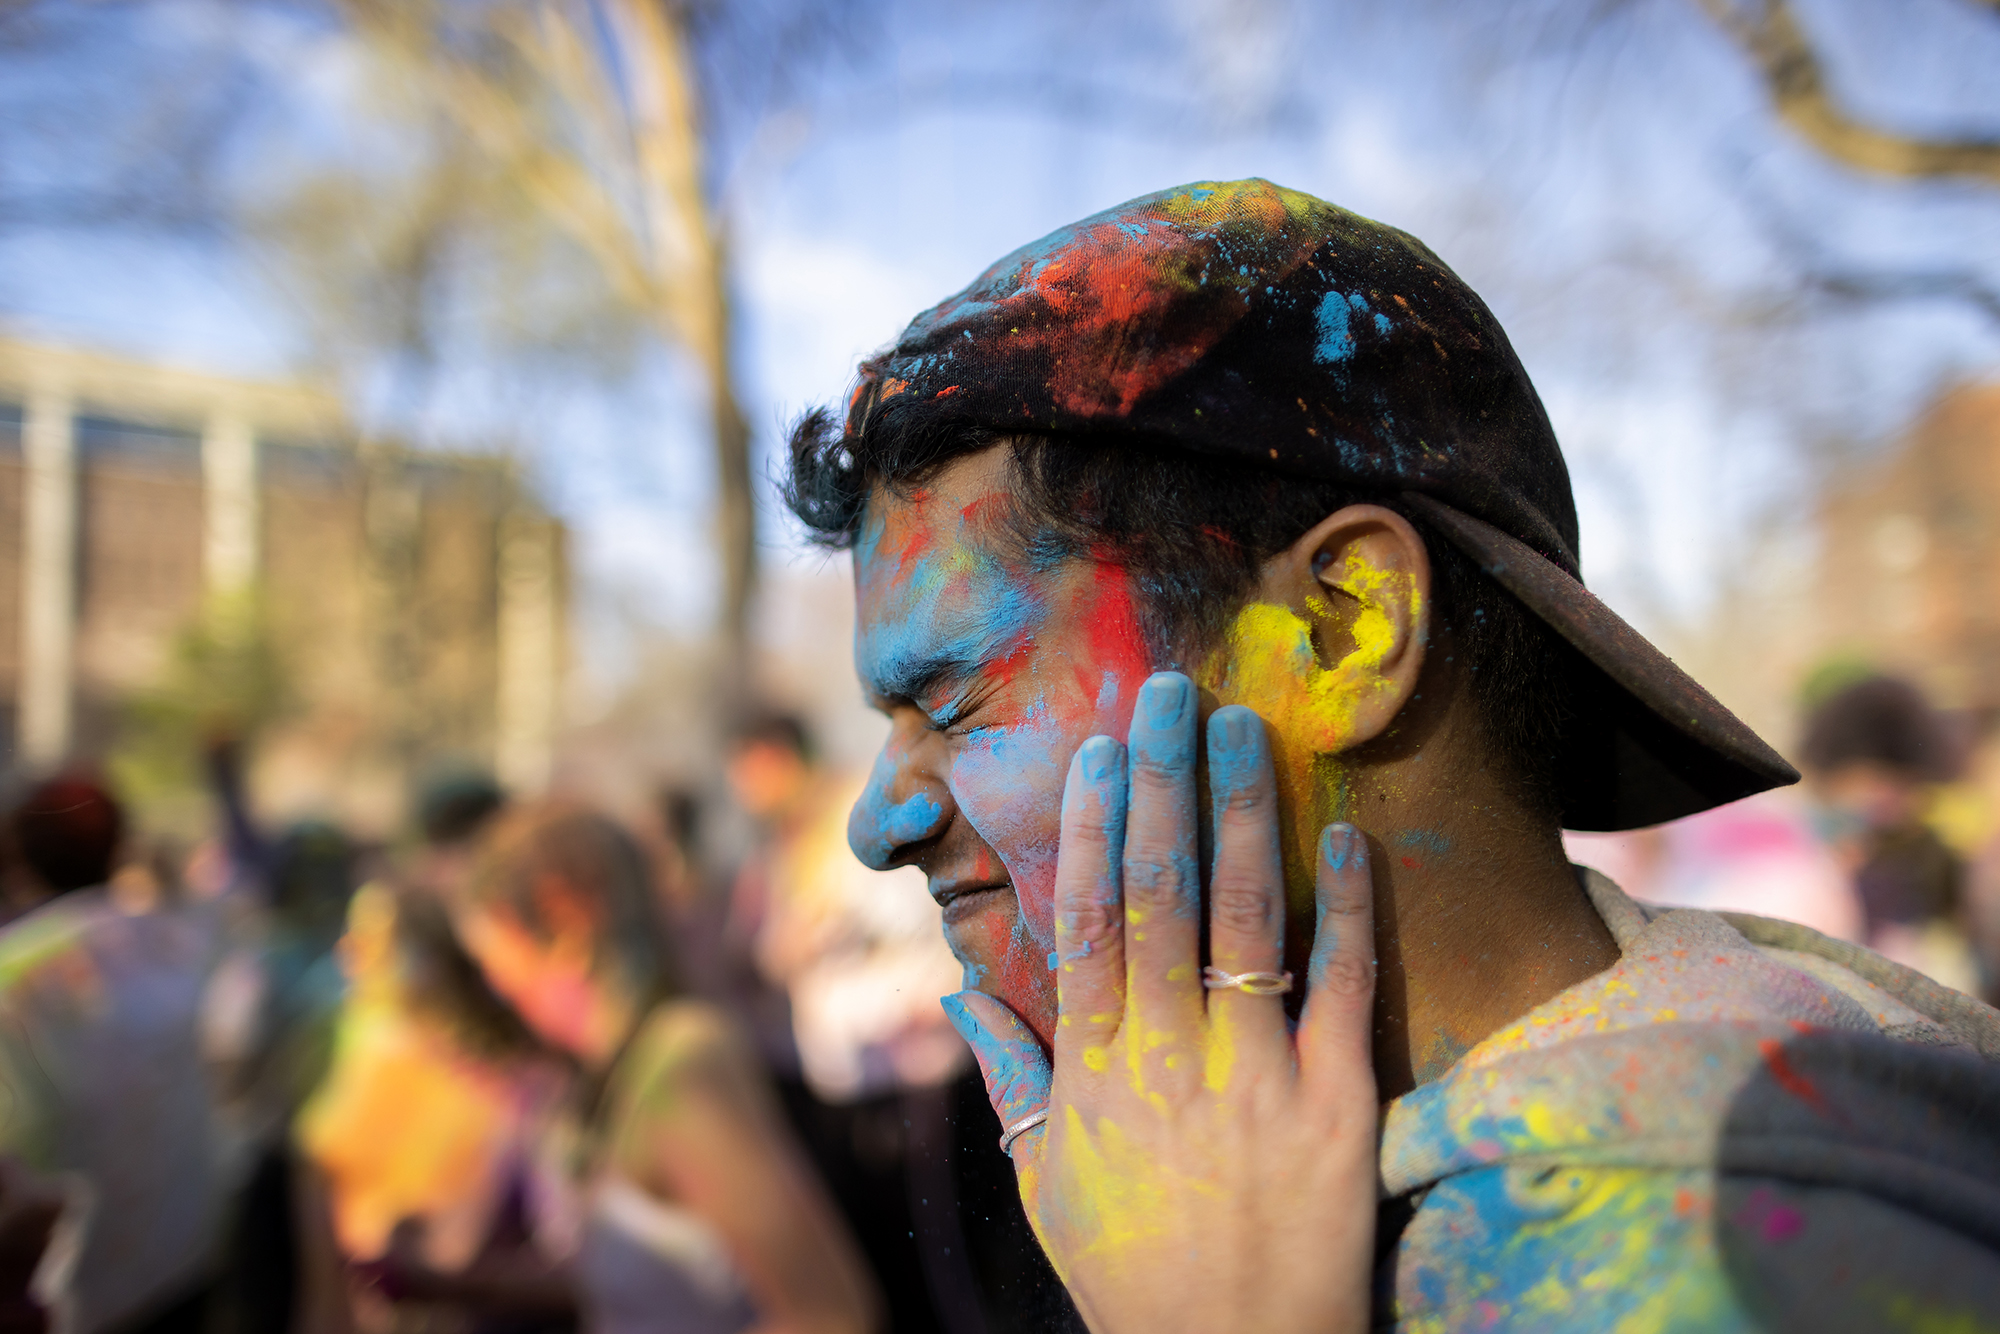 A Penn student rubs powder onto the face of another Penn student during the Holi celebration.